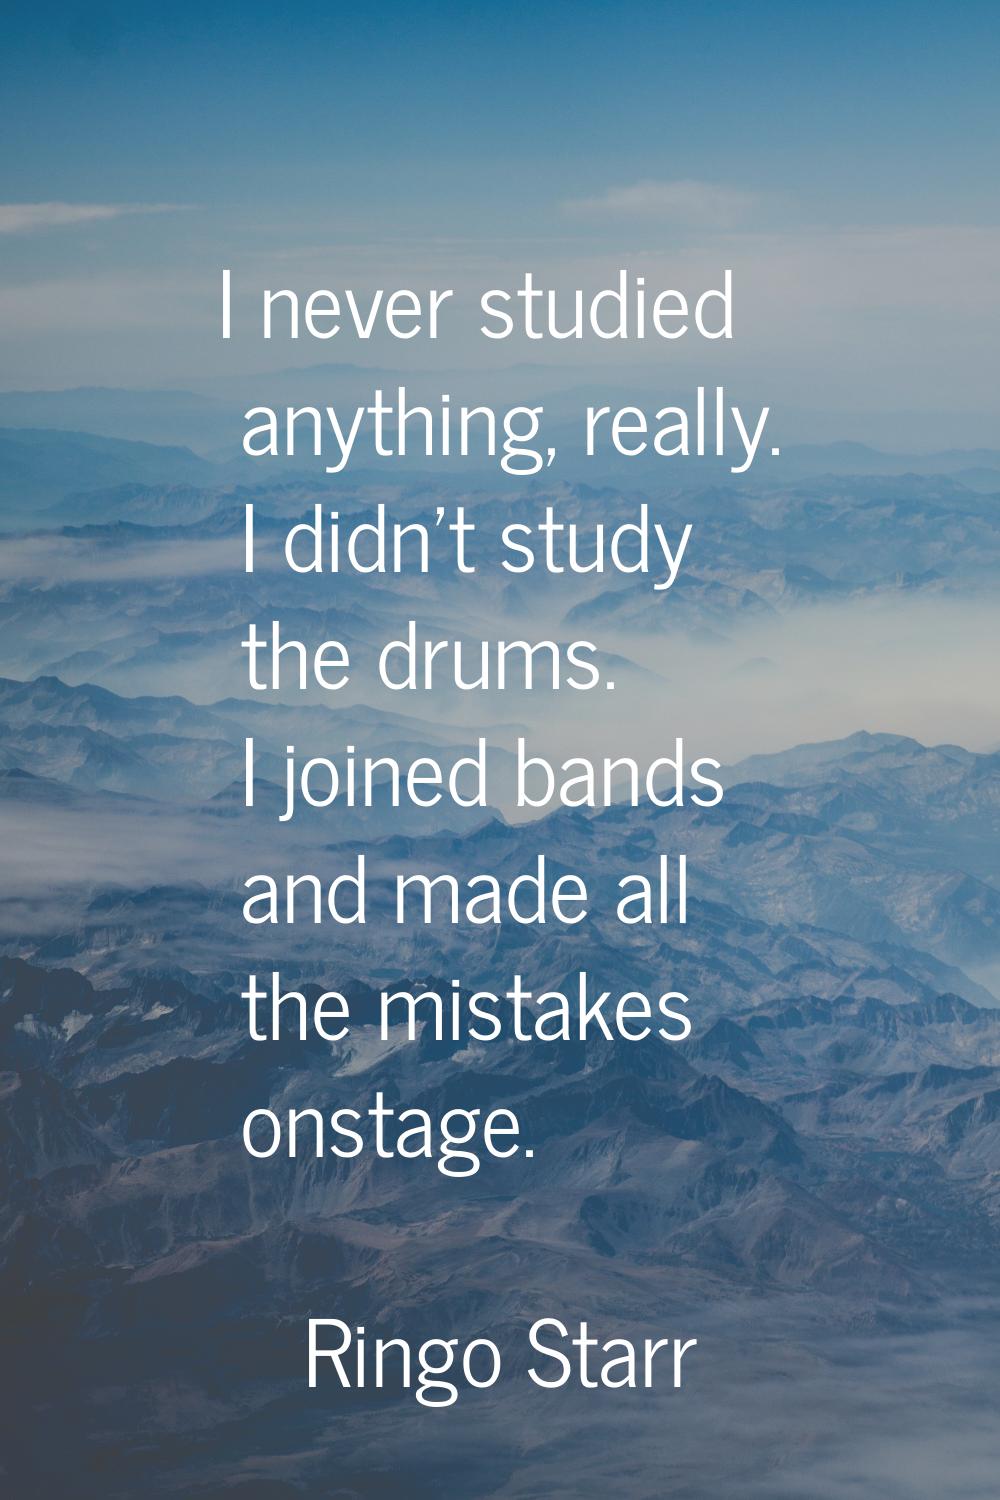 I never studied anything, really. I didn't study the drums. I joined bands and made all the mistake